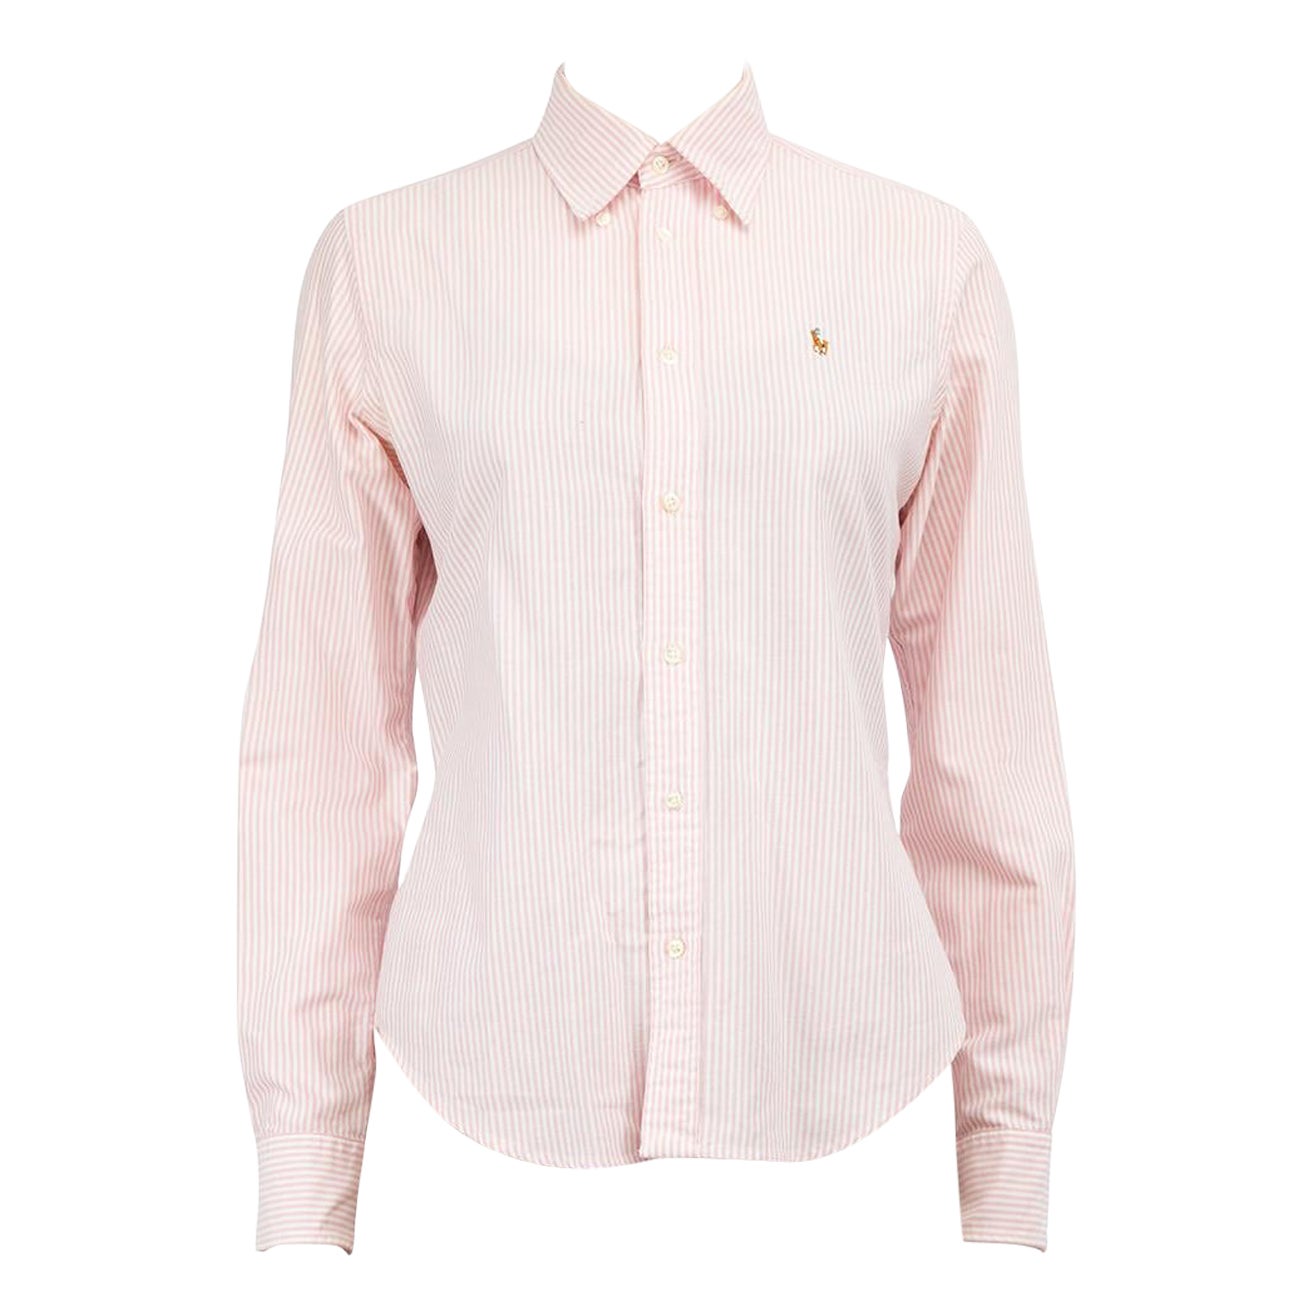 Ralph Lauren Pink Striped Long Sleeves Shirt Size M For Sale